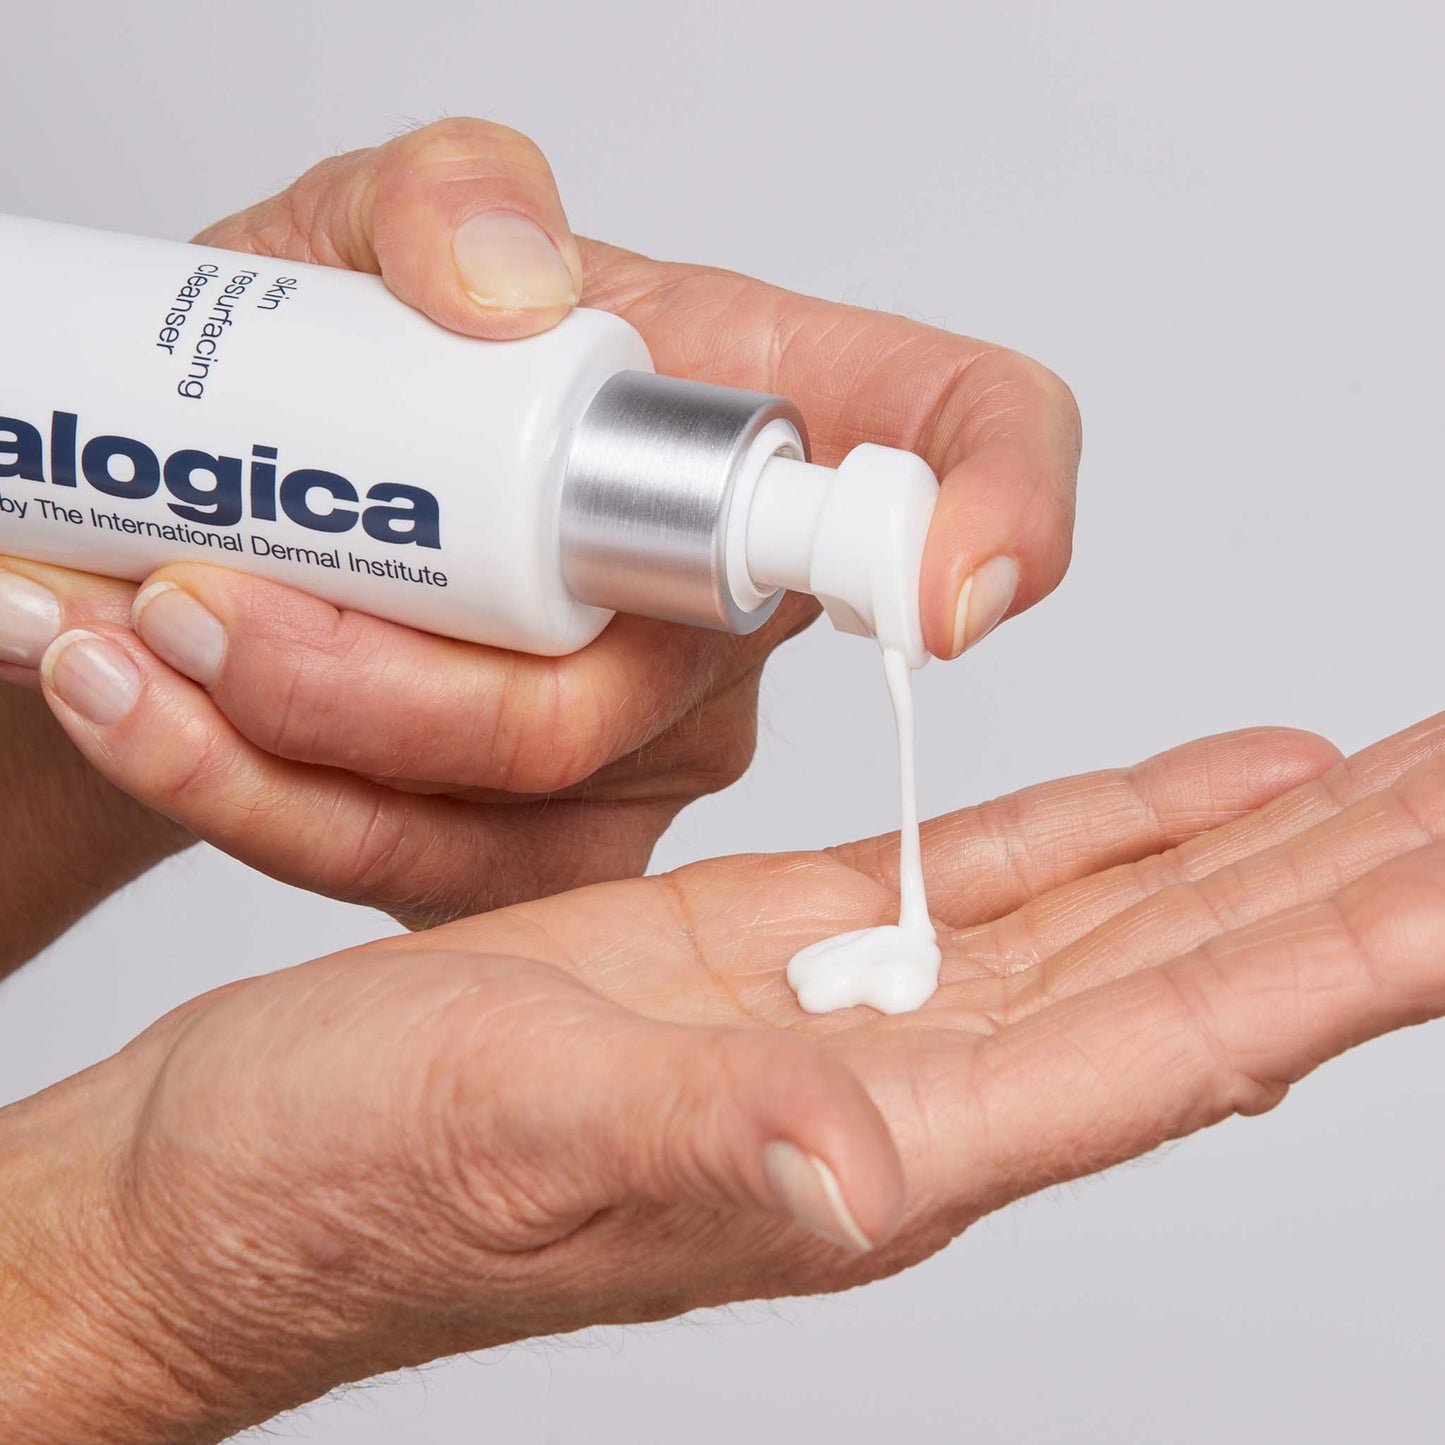 skin resurfacing cleanser being dispensed into hand